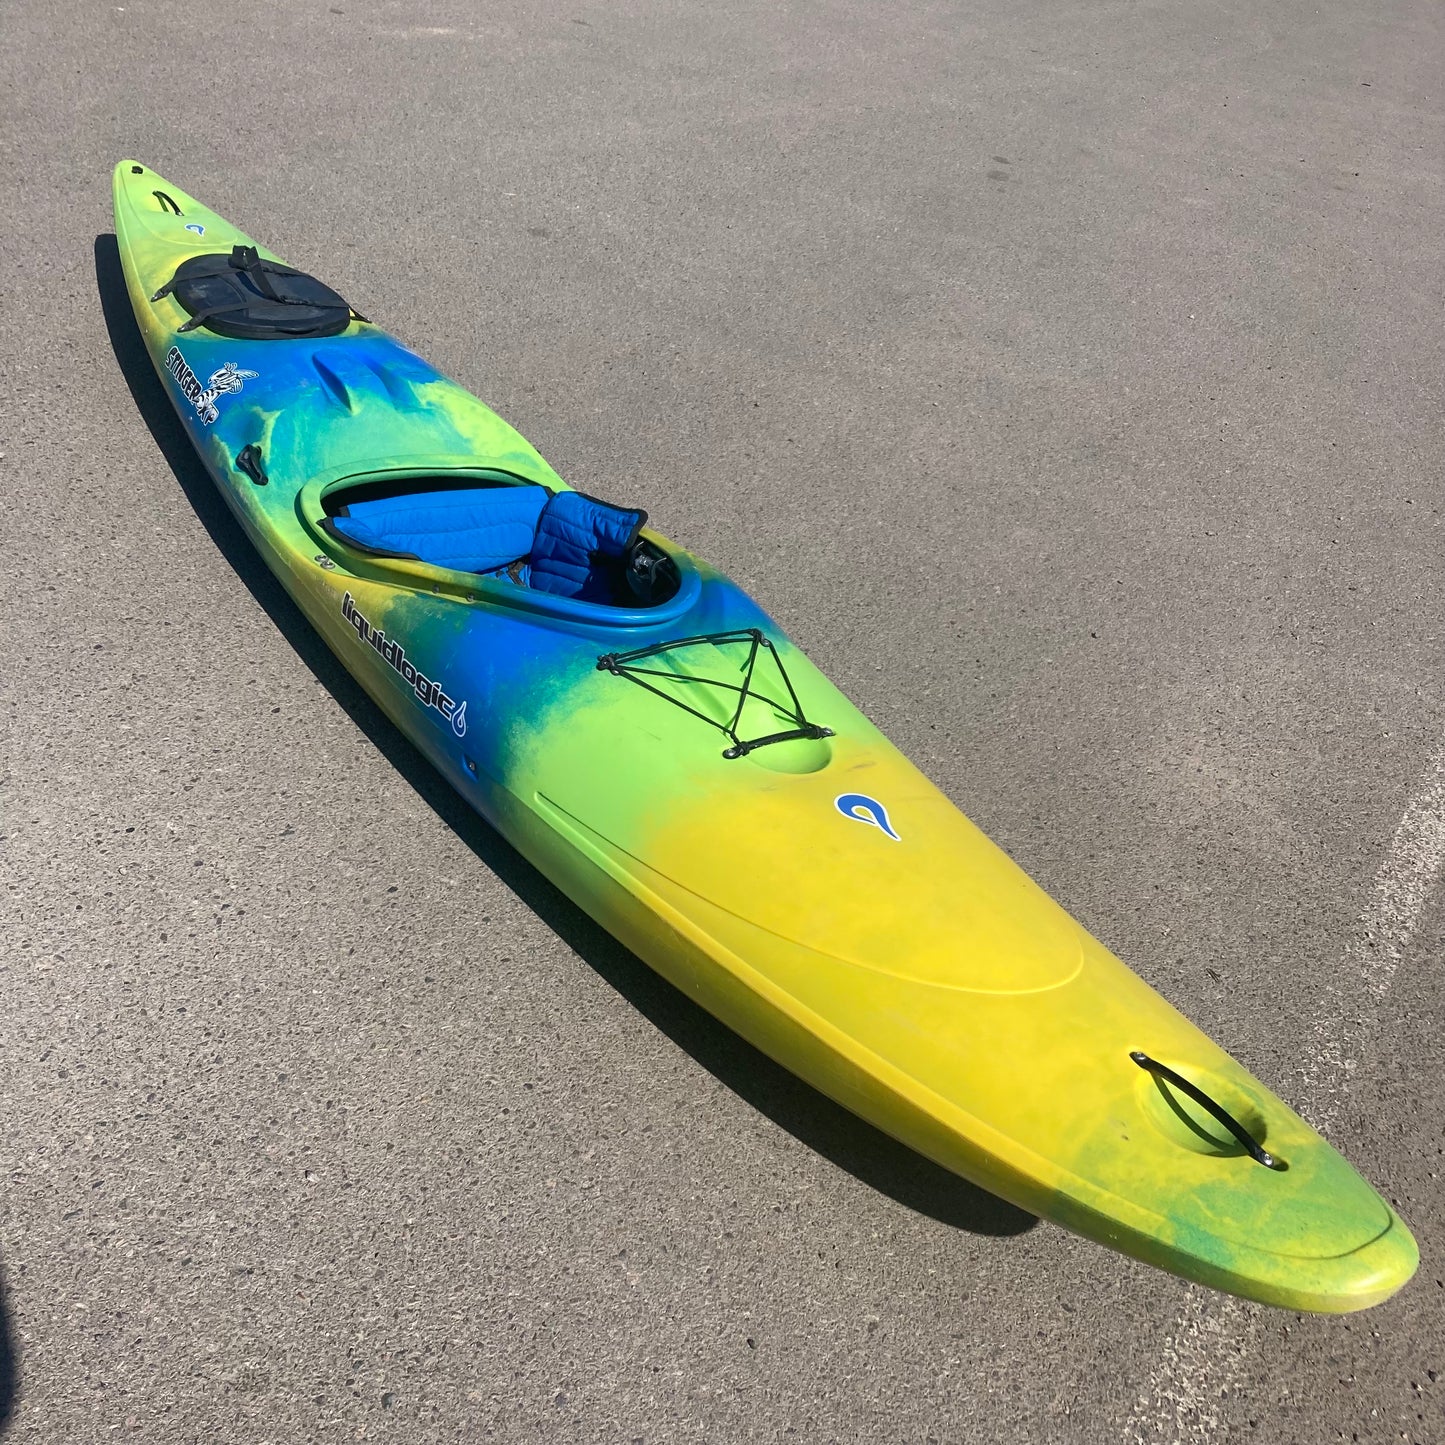 A yellow and blue LiquidLogic Demo Stinger XP kayak is parked in a parking lot.